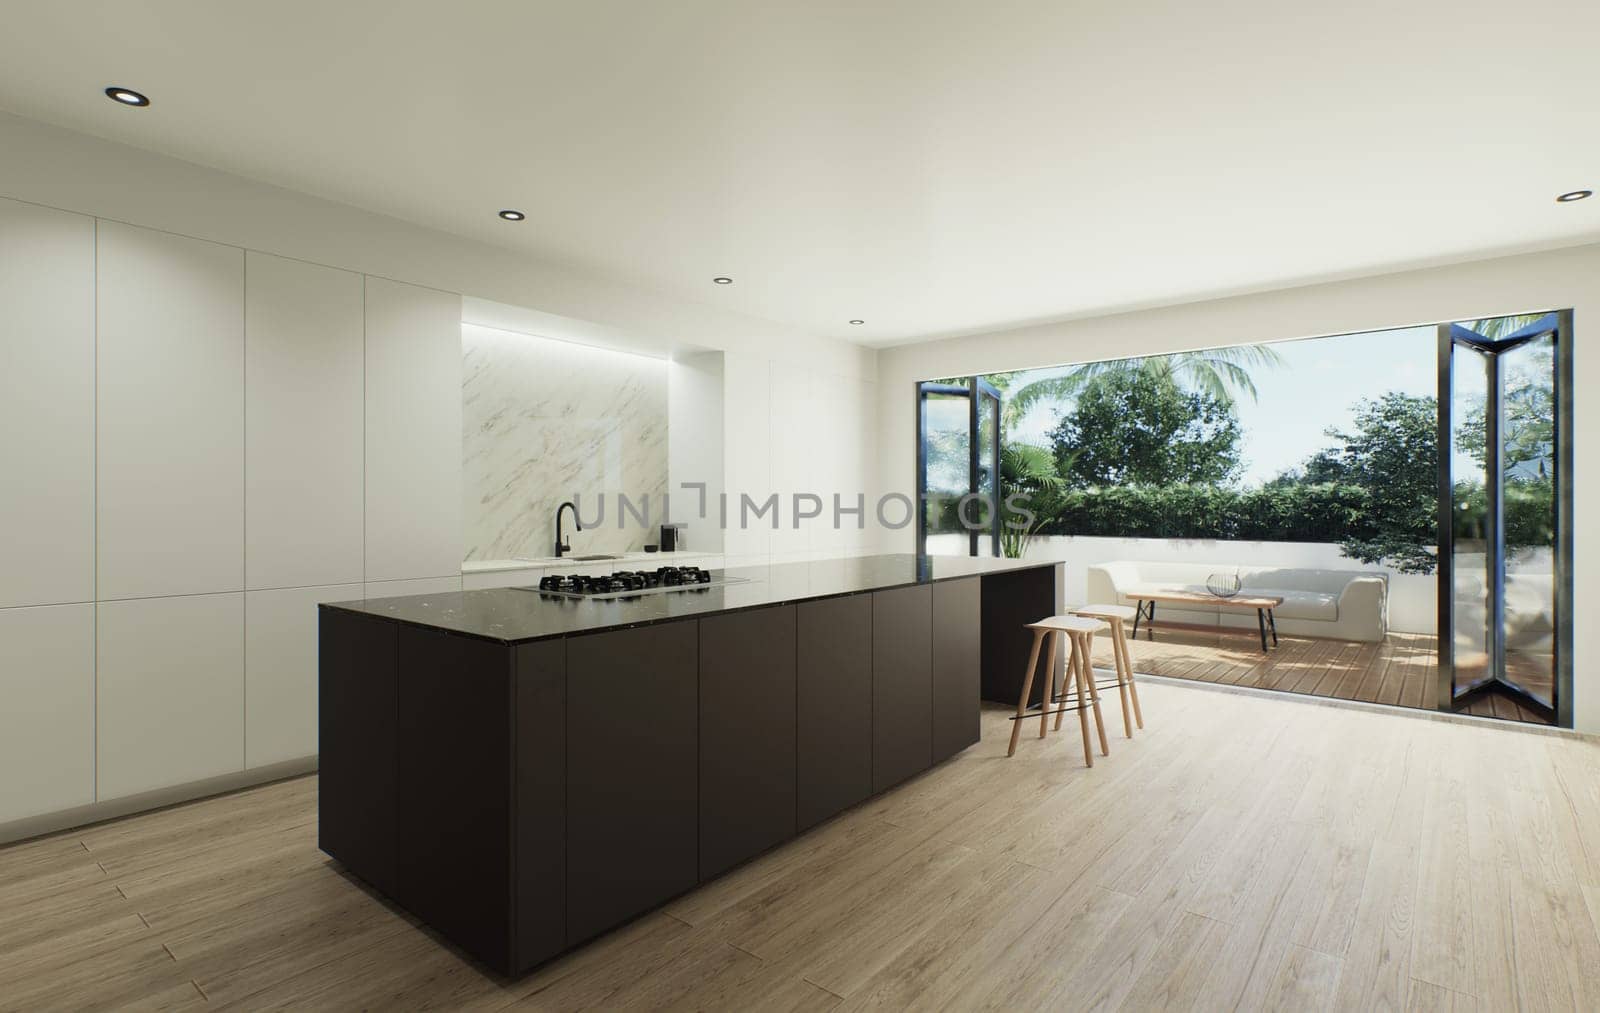 Design 3d visualization of the interior is made in a strict minimalistic style. Large dark kitchen island with large panoramic window and minimalist kitchen cabinets using wood and marble materials.